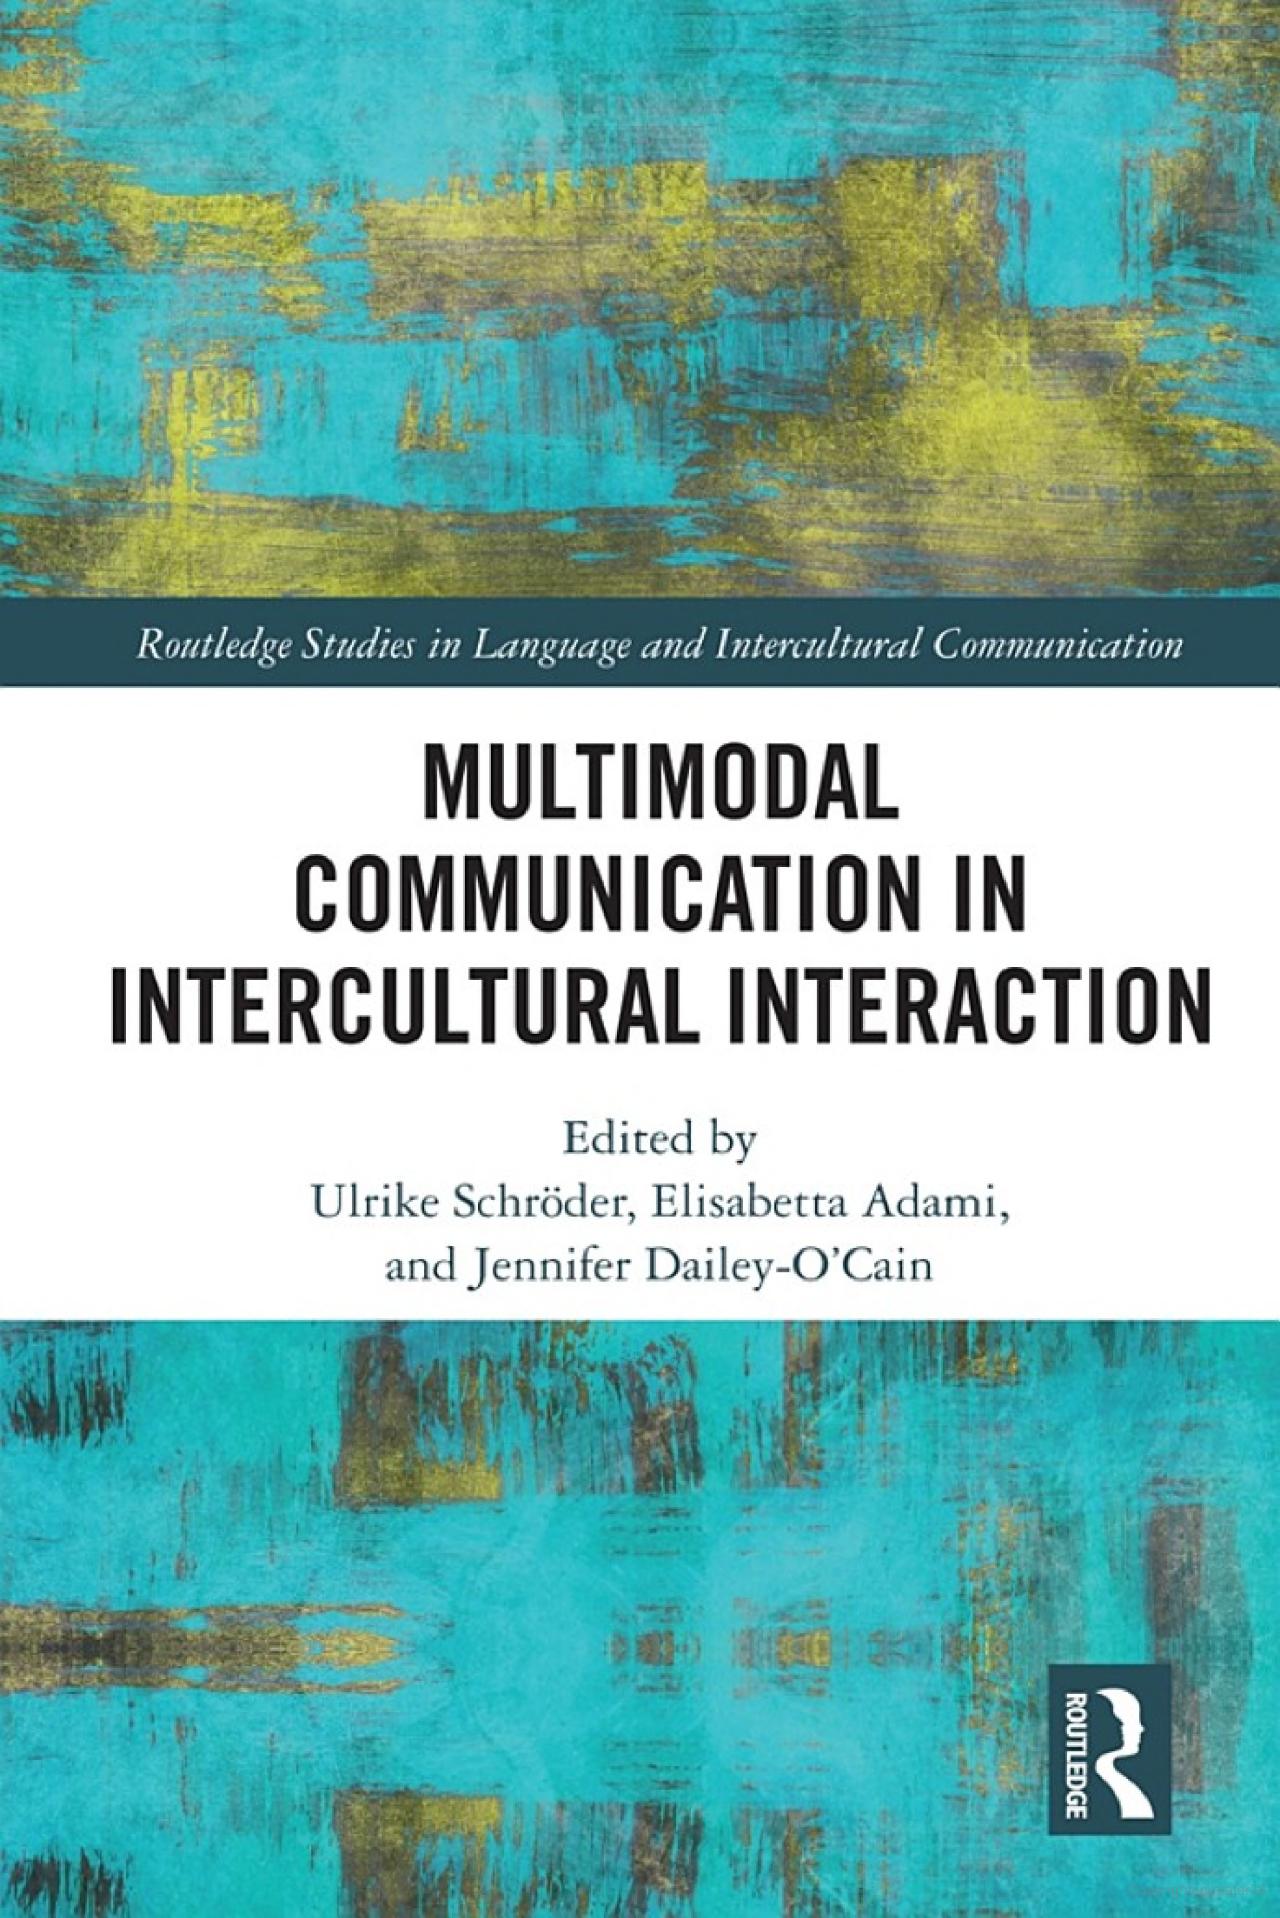 multimodal-communication-in-intercultural-interaction-2023-book-cover.jpg